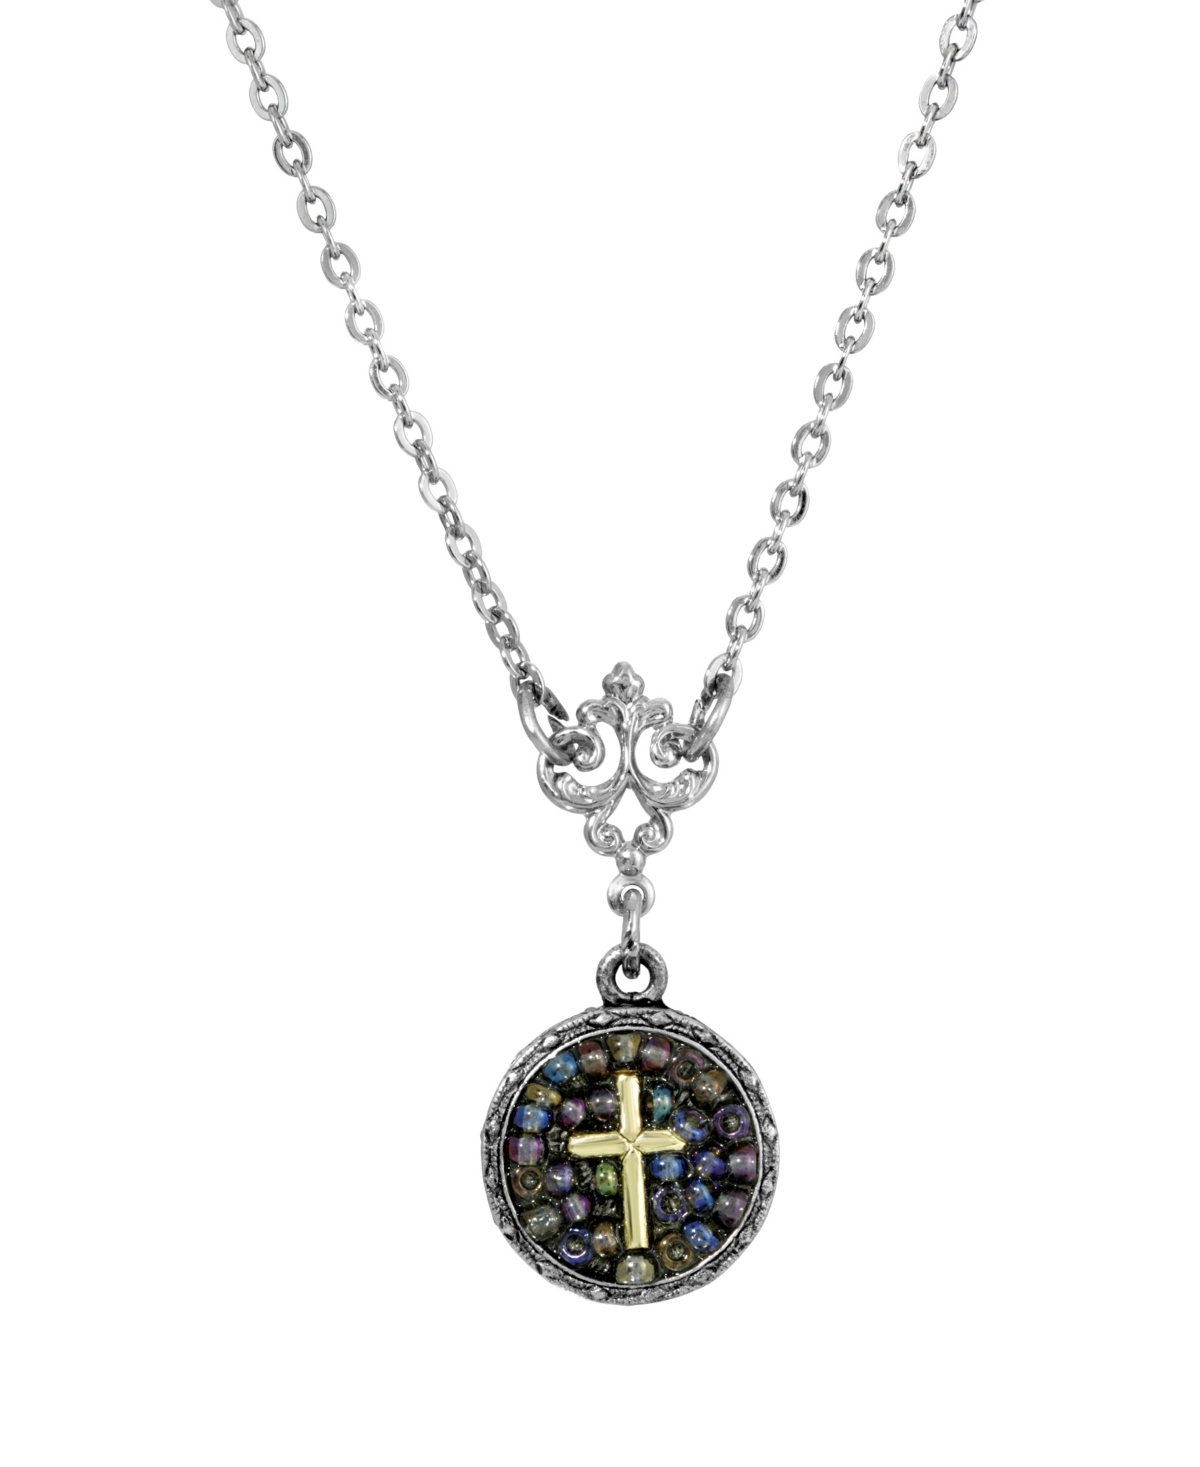 Silver-Tone Carded Multi Color Round Beaded Cross Necklace - Gray